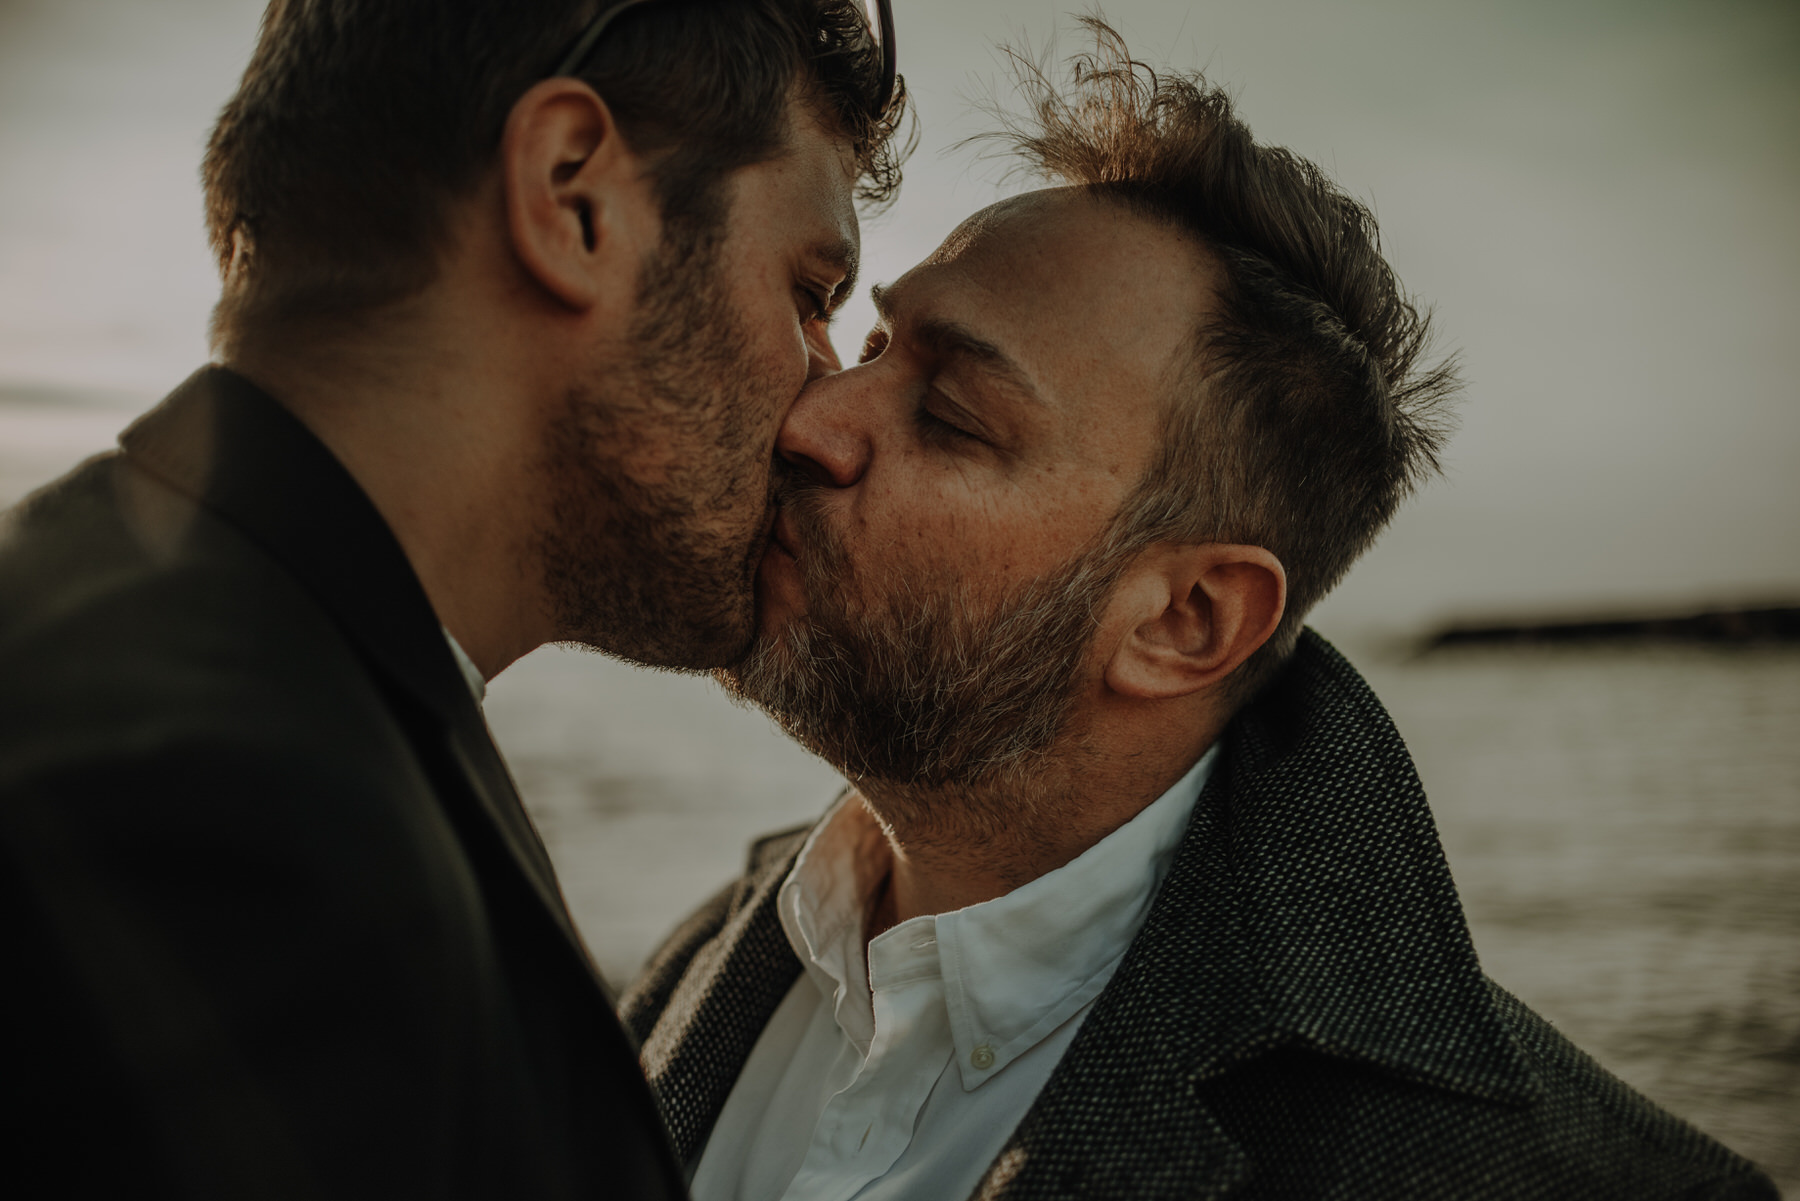 LGBTQ, Pride Month, equal rights for all, SCOTUS, gay couple, lesbian couple, same sex couples, wedding photographer, same sex couple photographer, AmorVincitOmnia, Italy wedding photographer, italy elopement photographer, elopement photographer in italy